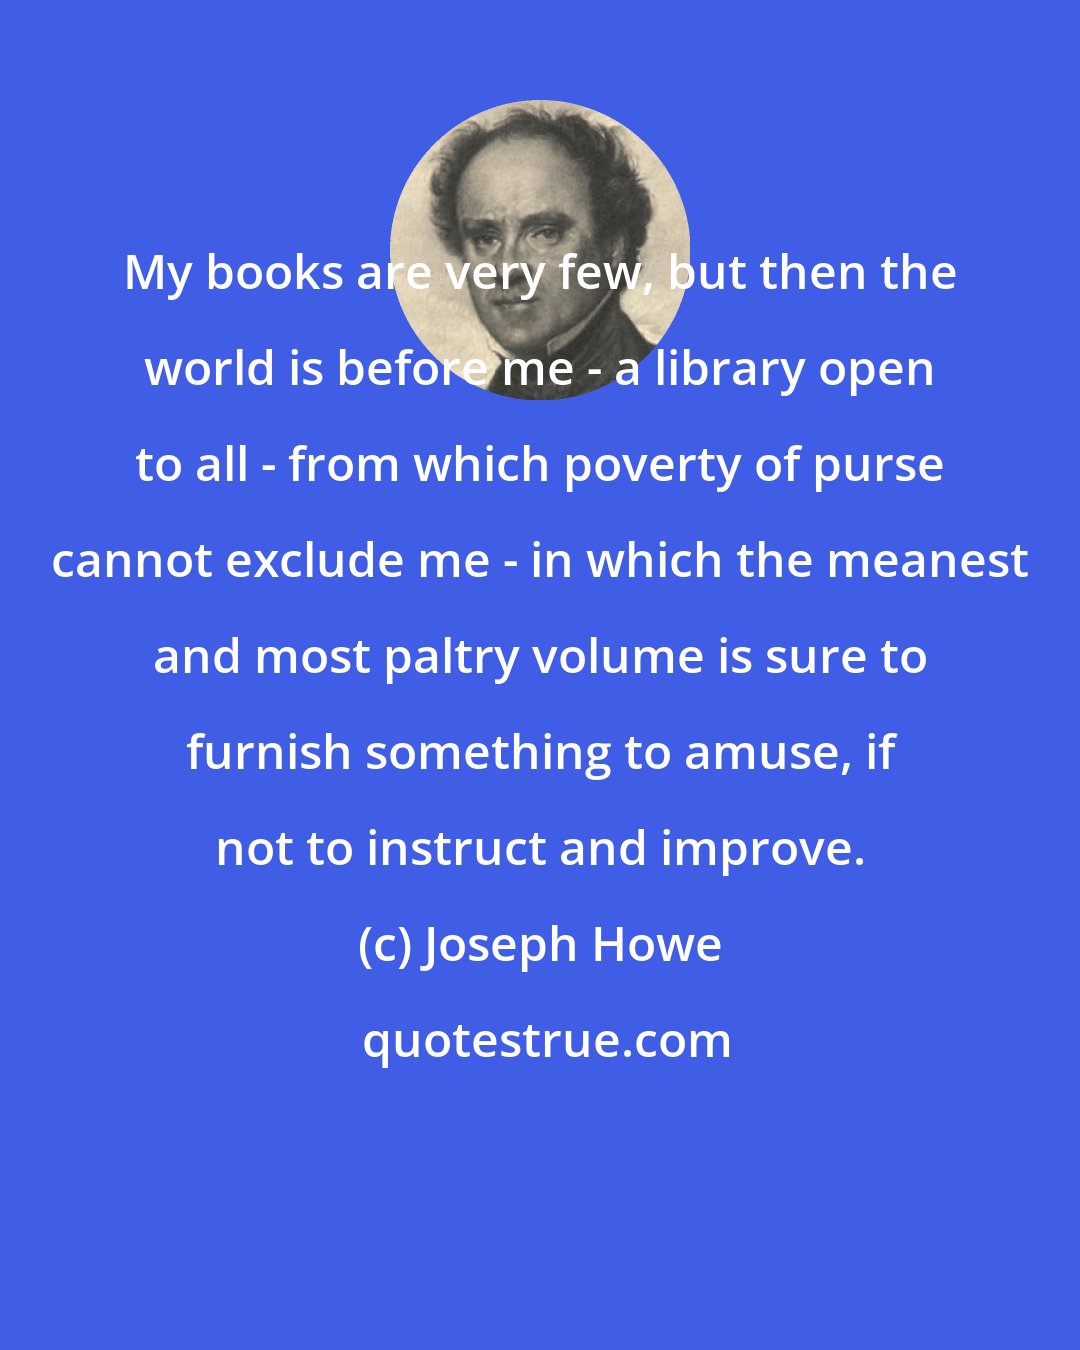 Joseph Howe: My books are very few, but then the world is before me - a library open to all - from which poverty of purse cannot exclude me - in which the meanest and most paltry volume is sure to furnish something to amuse, if not to instruct and improve.